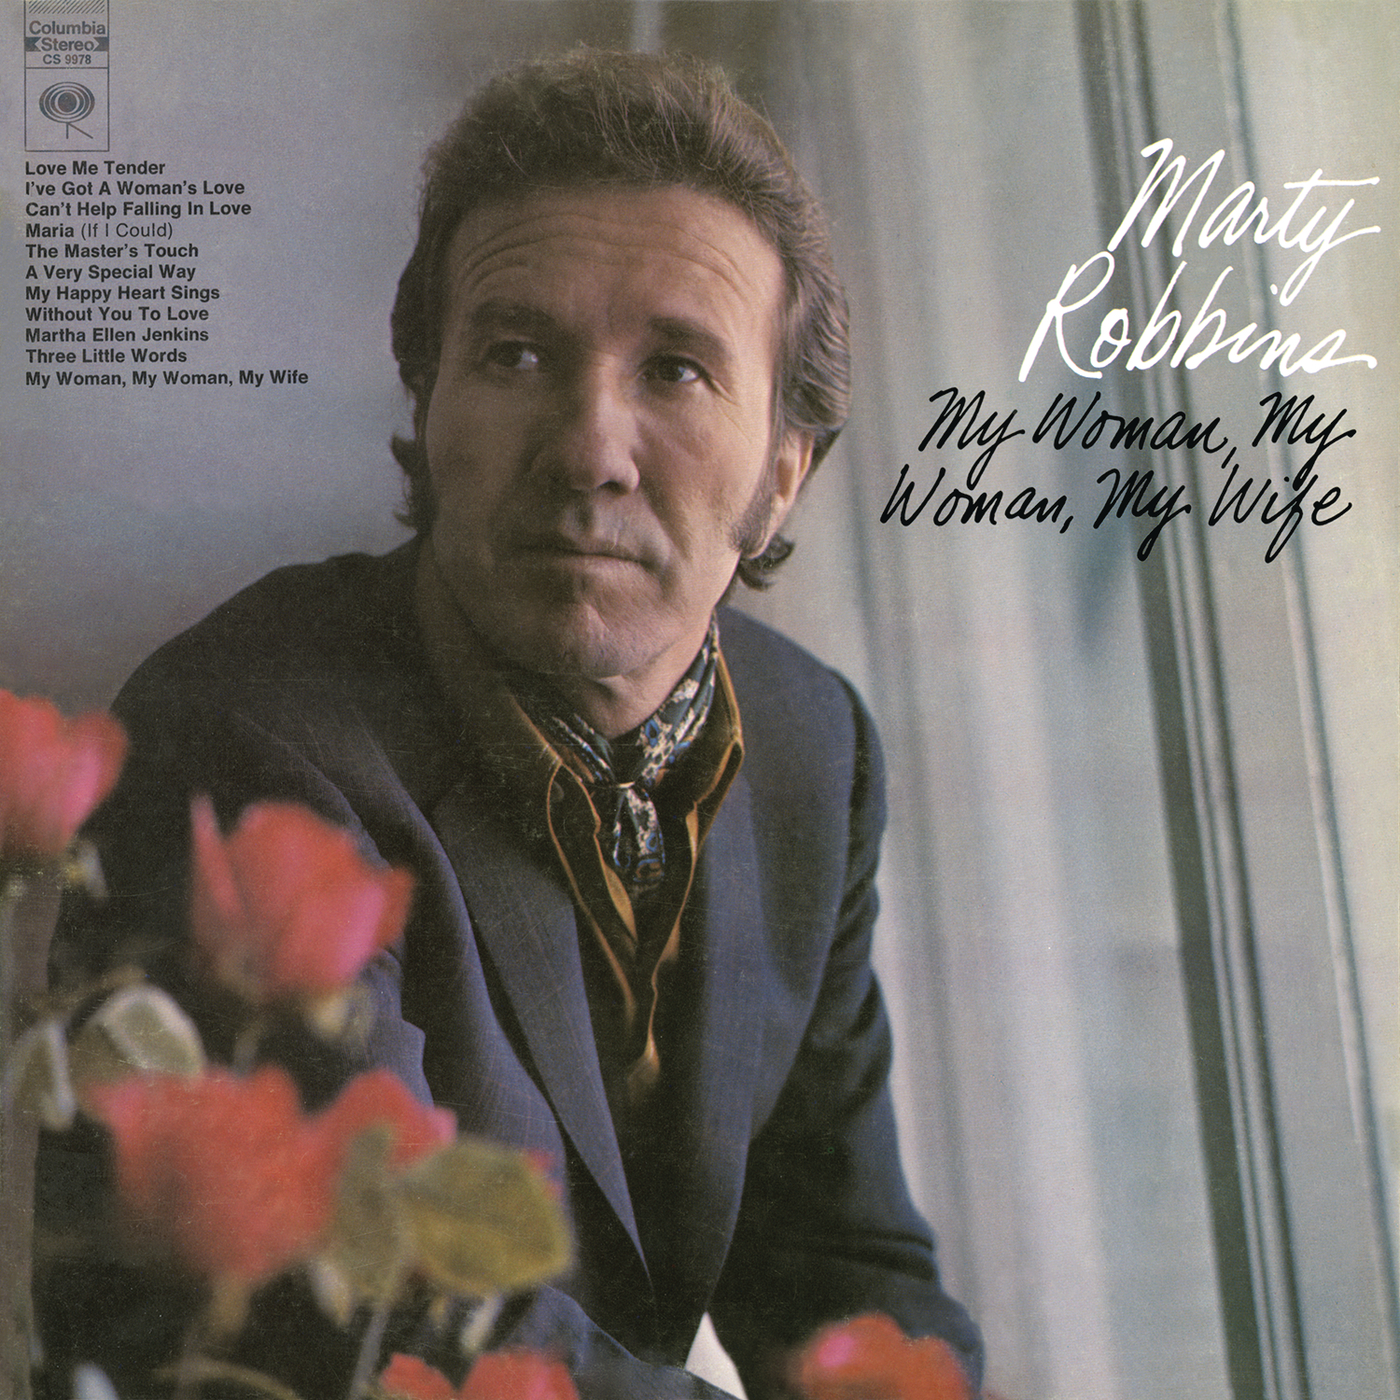 Without You to Love/Marty Robbins